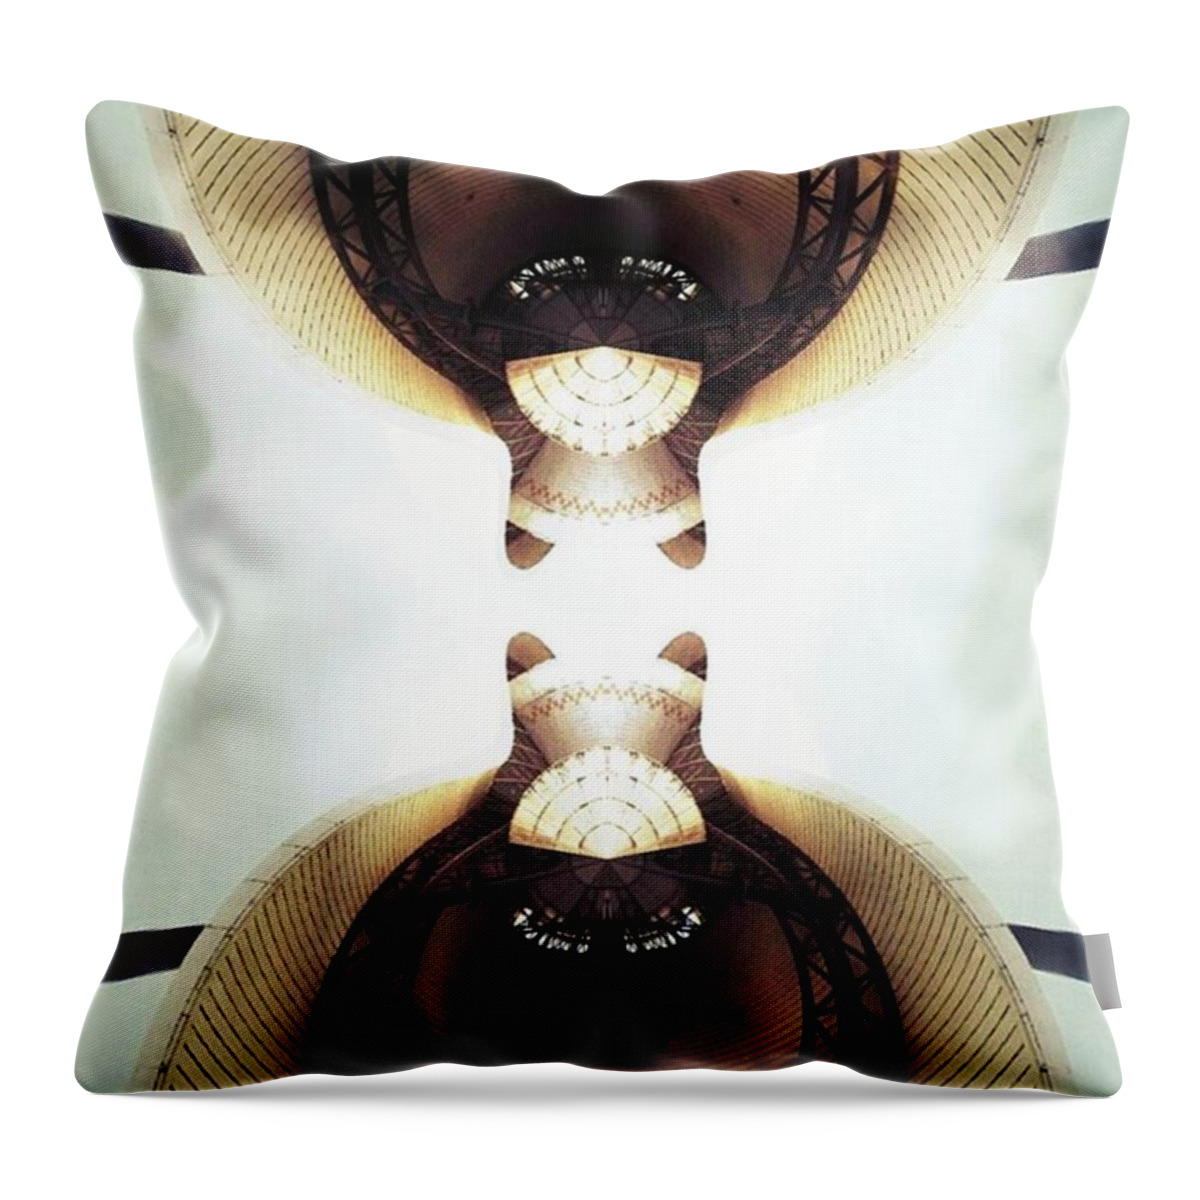 Inspire Throw Pillow featuring the photograph Connected by Jorge Ferreira